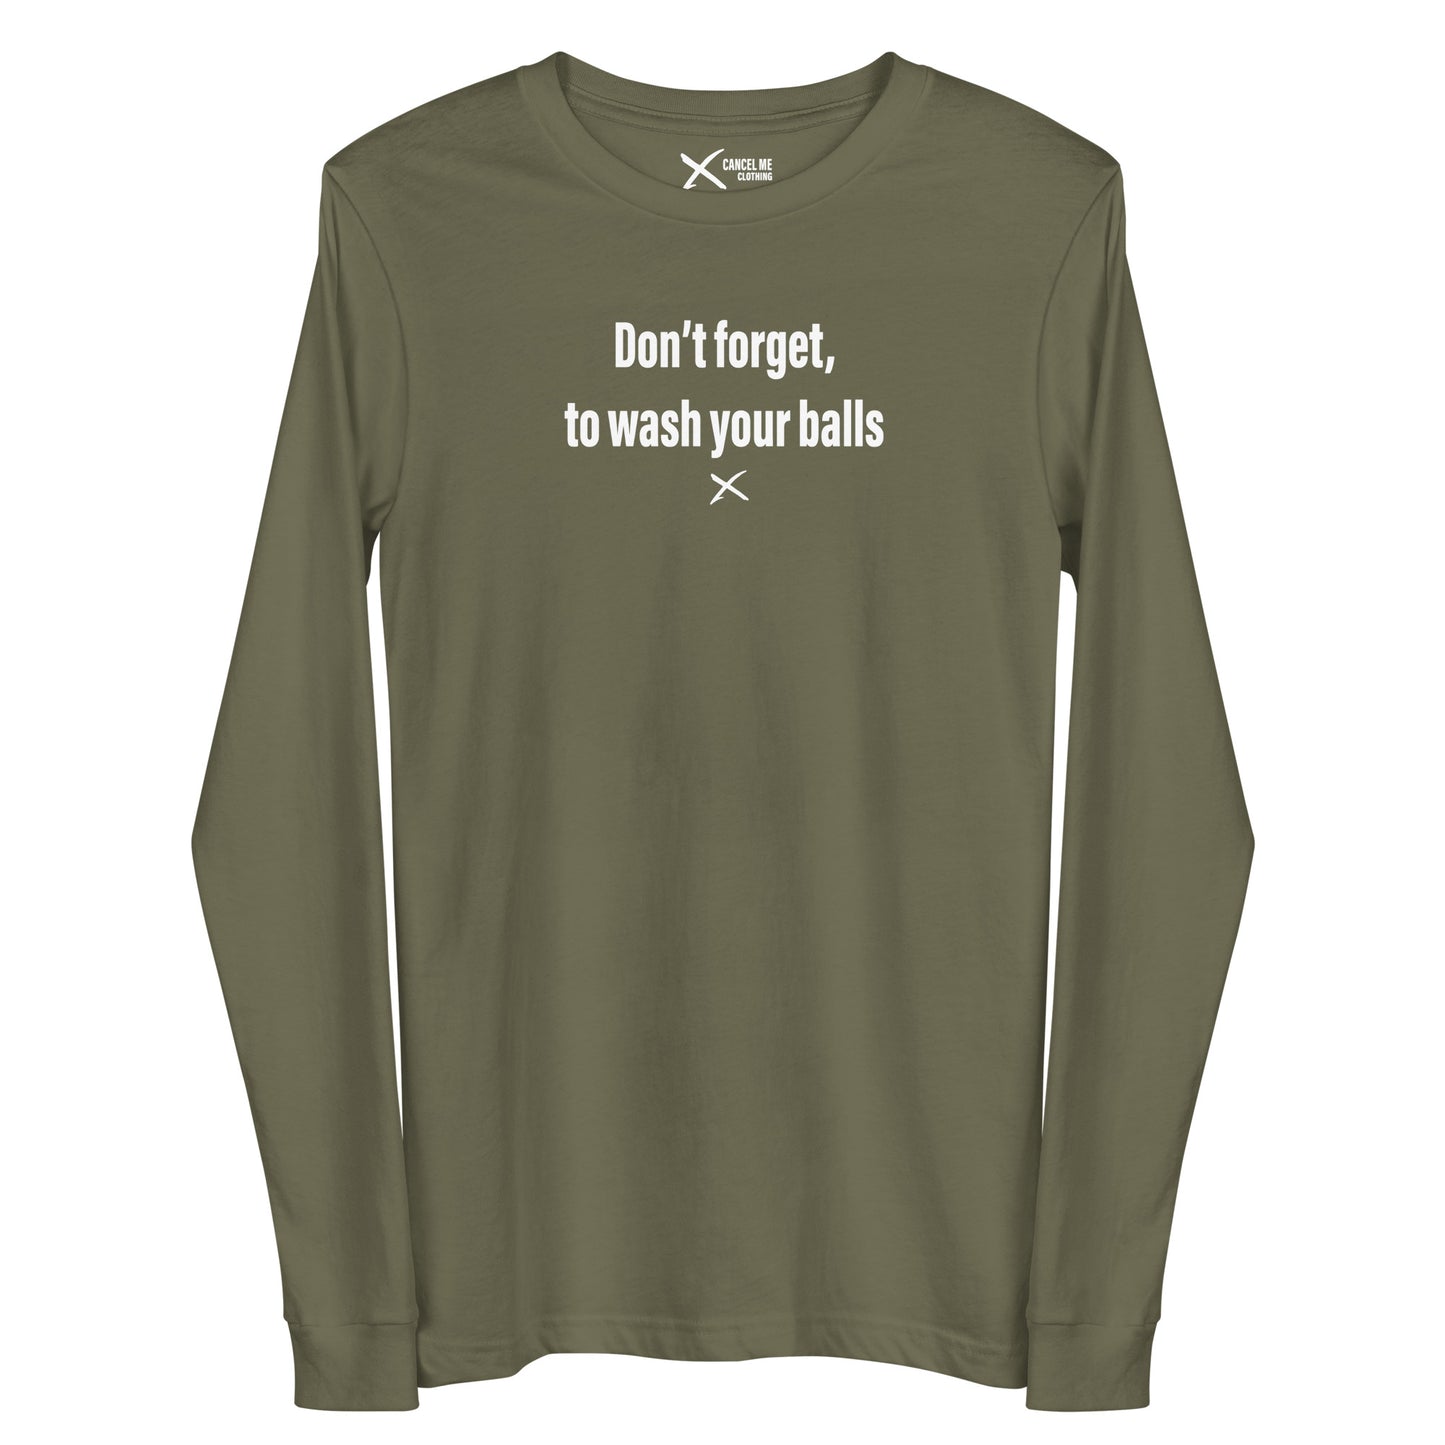 Don't forget, to wash your balls - Longsleeve